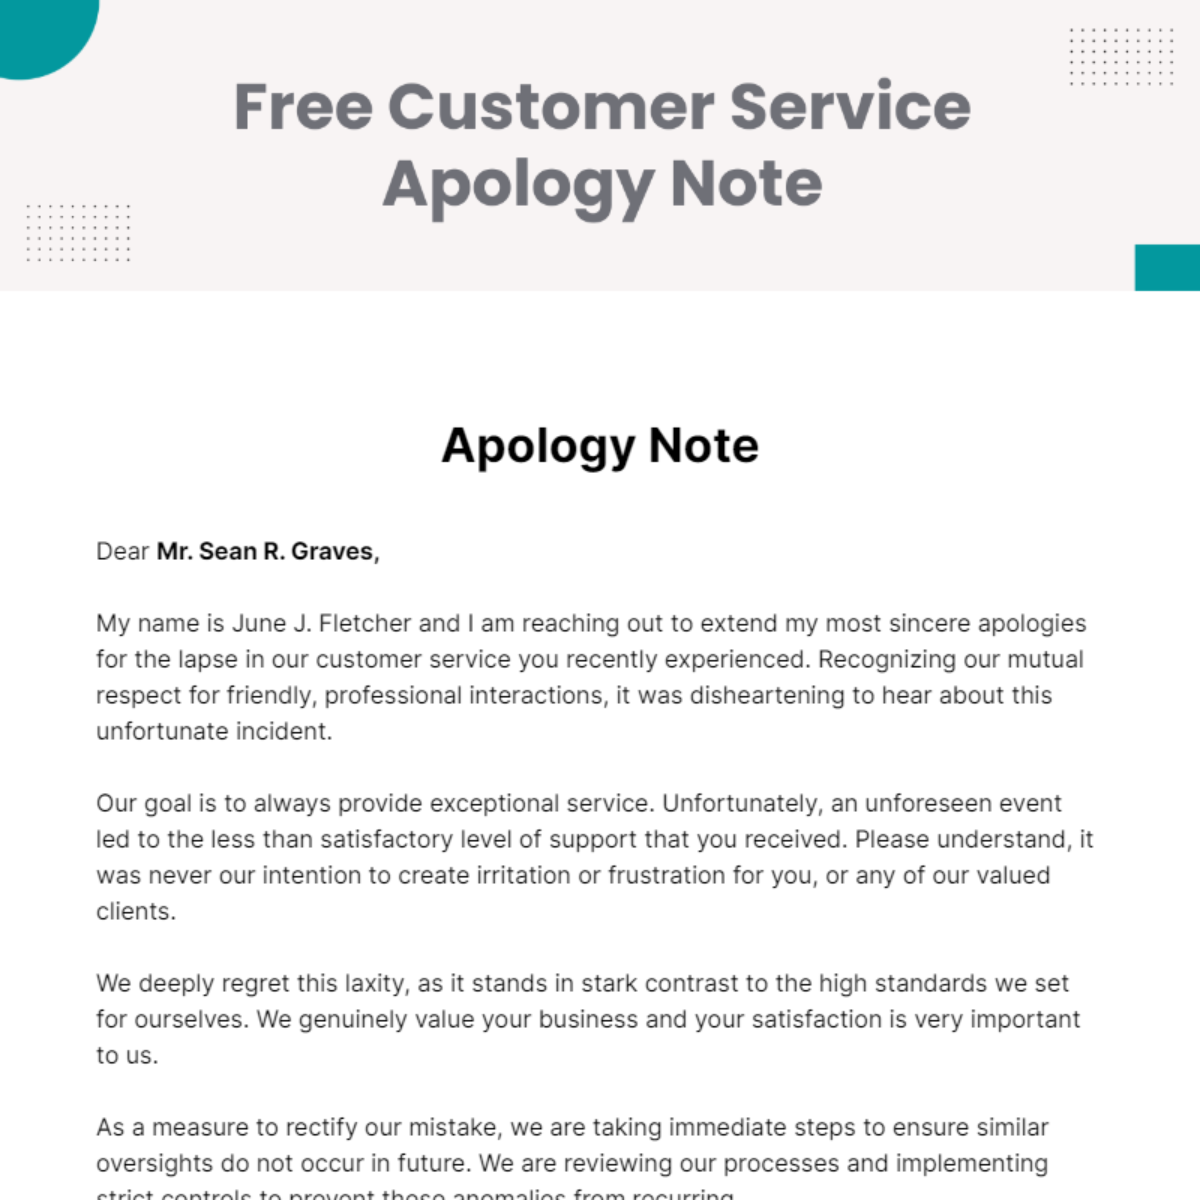 Customer Service Apology Note Template